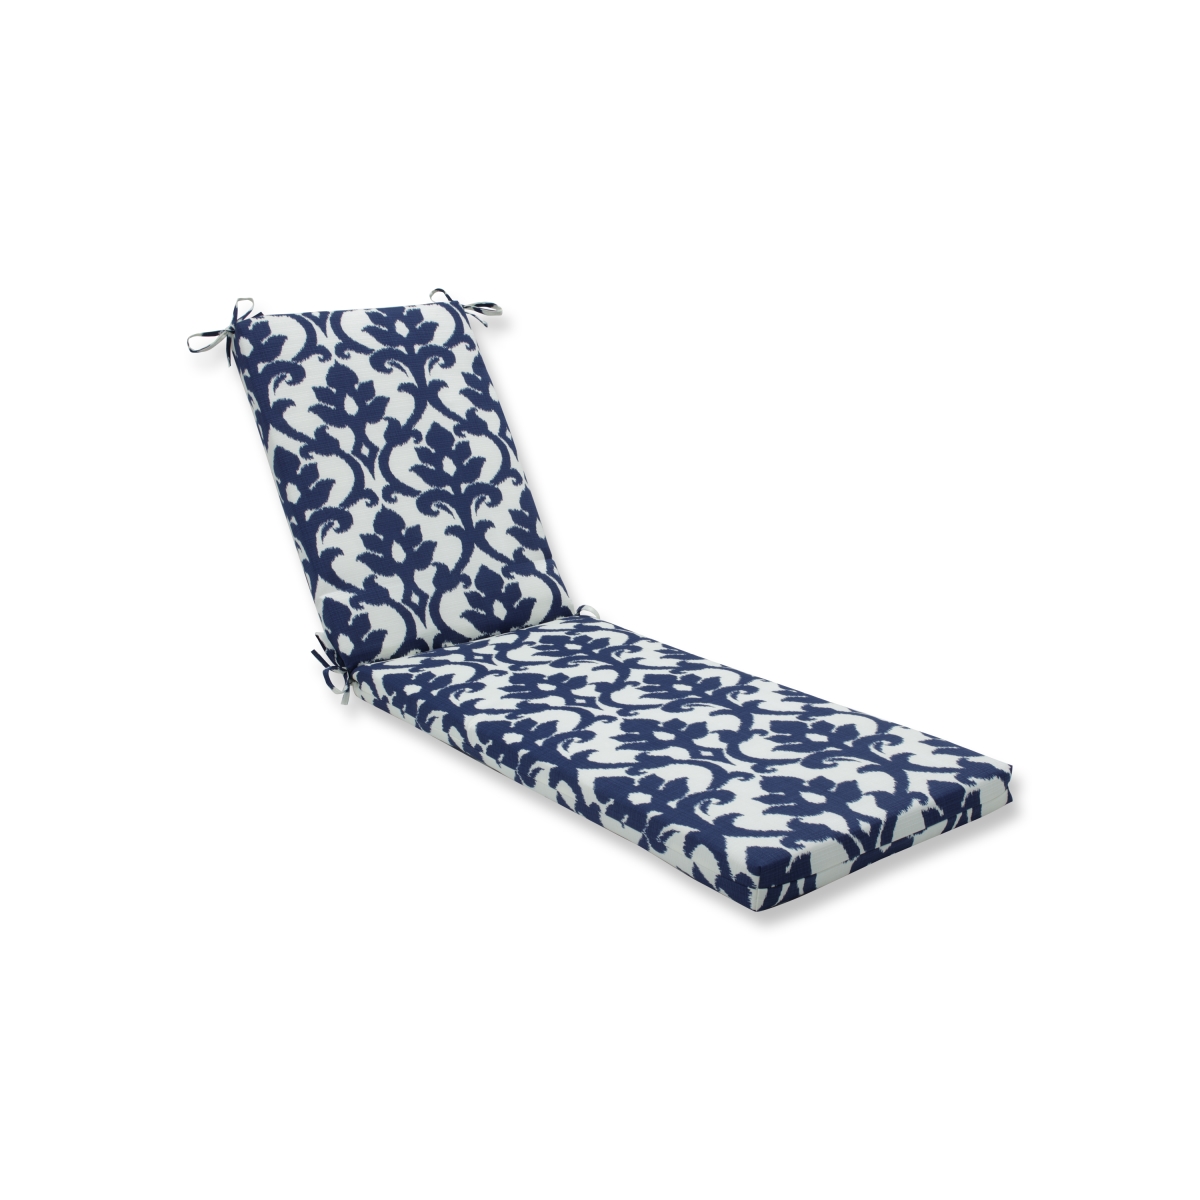 80 X 23 X 3 In. Outdoor & Indoor Basalto Navy Chaise Lounge Cushion, Blue